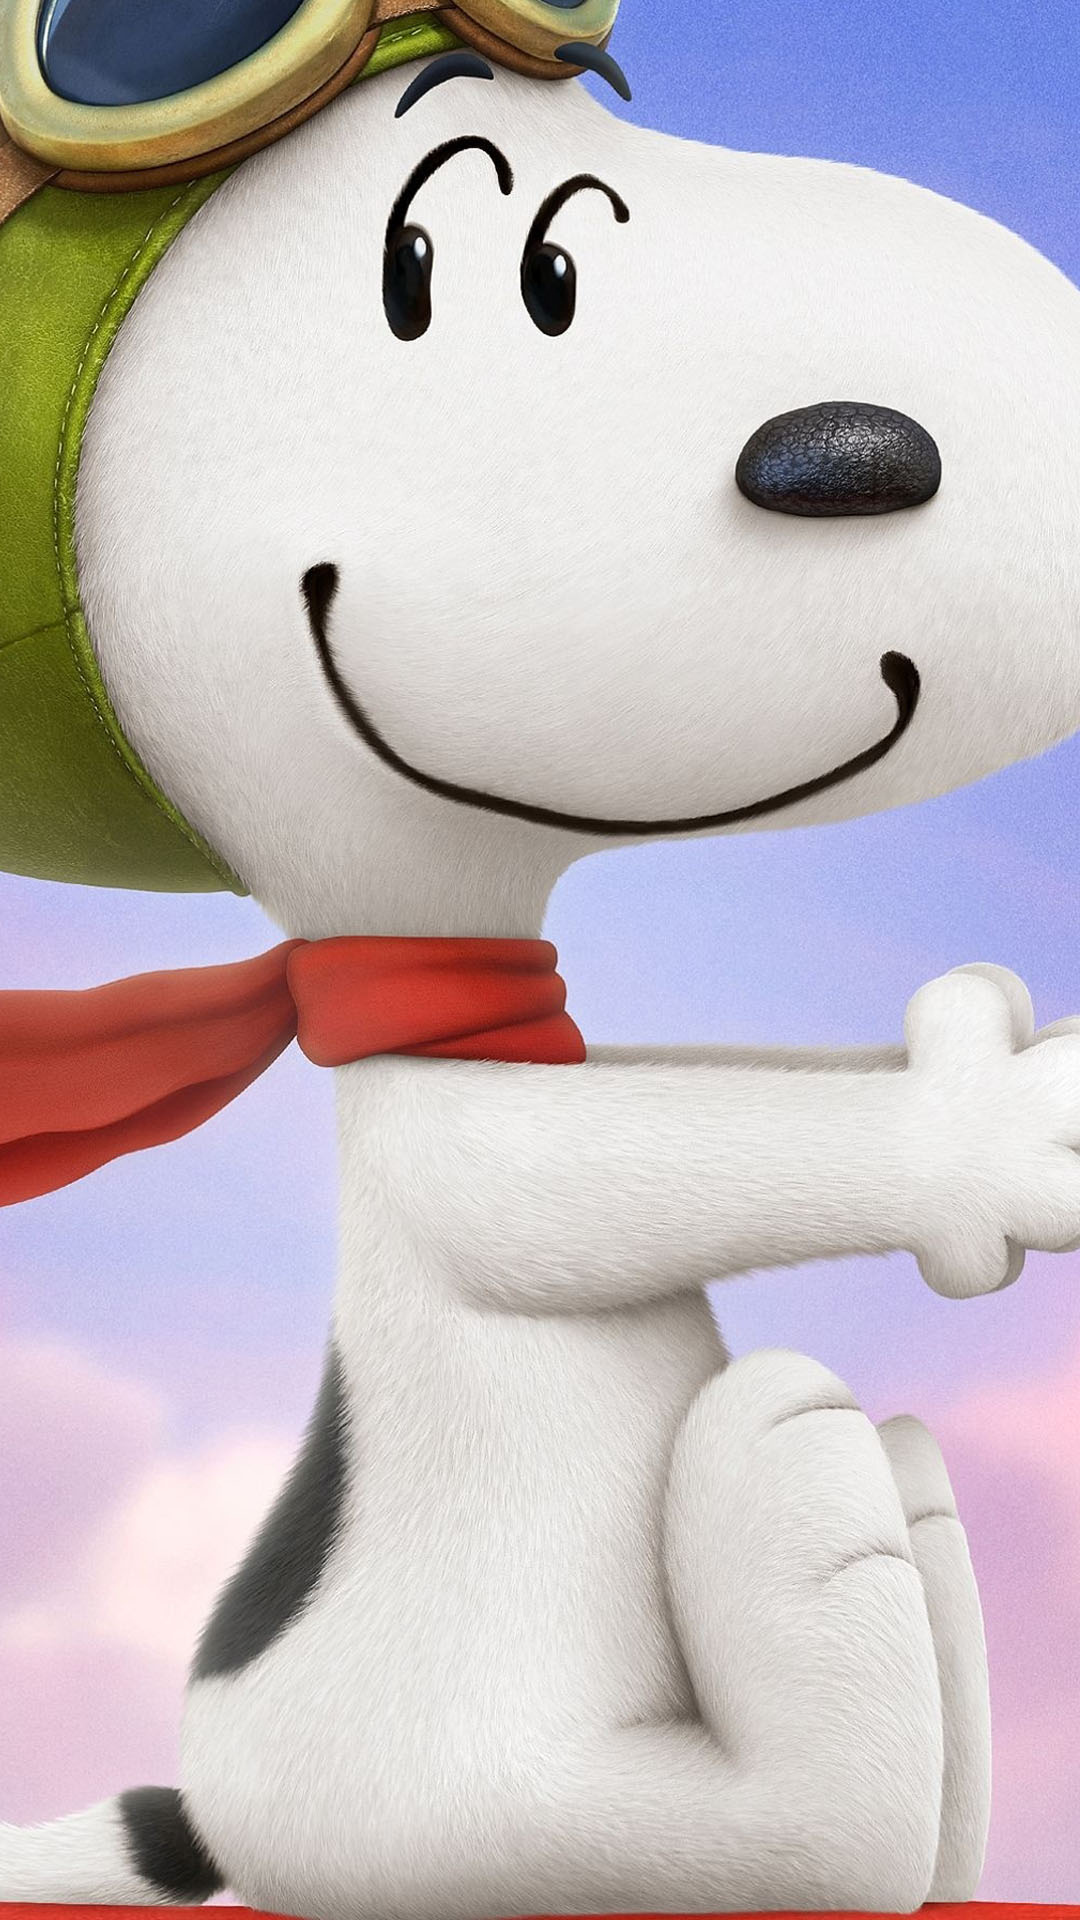 Peanuts Snoopy iPhone 6 6 Plus and iPhone 54 Wallpapers